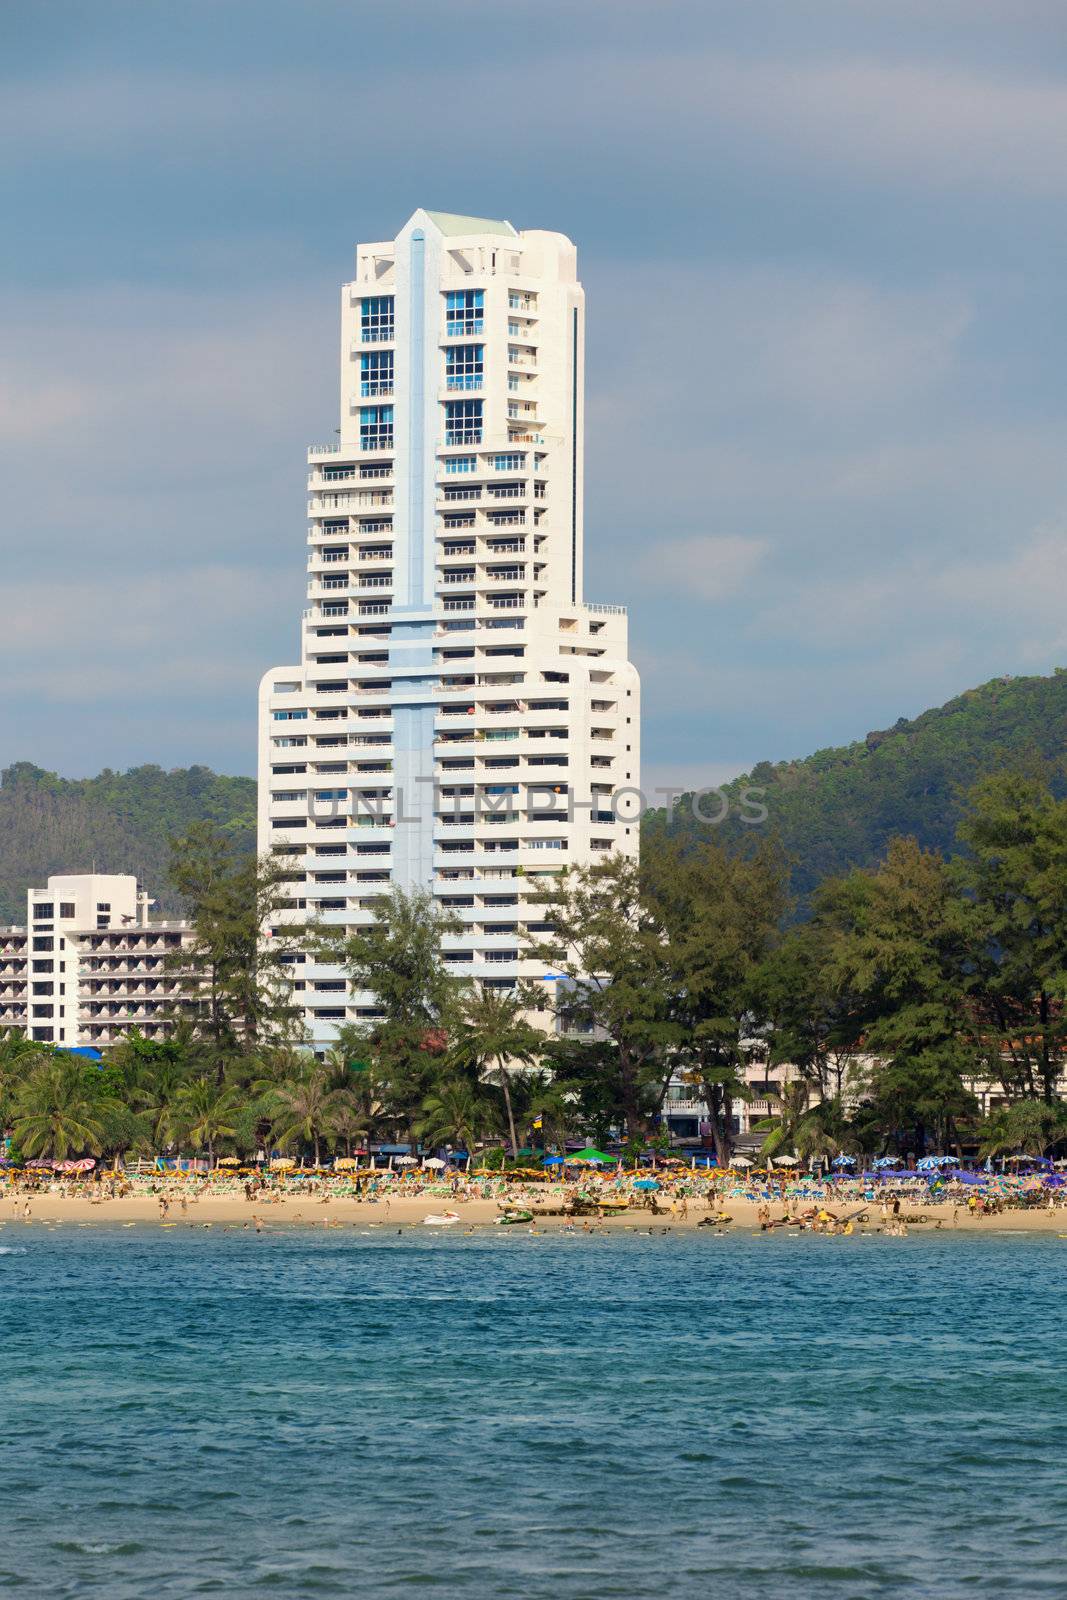 Large high-rise hotel. Thailand, Phuket, Patong. by pzaxe